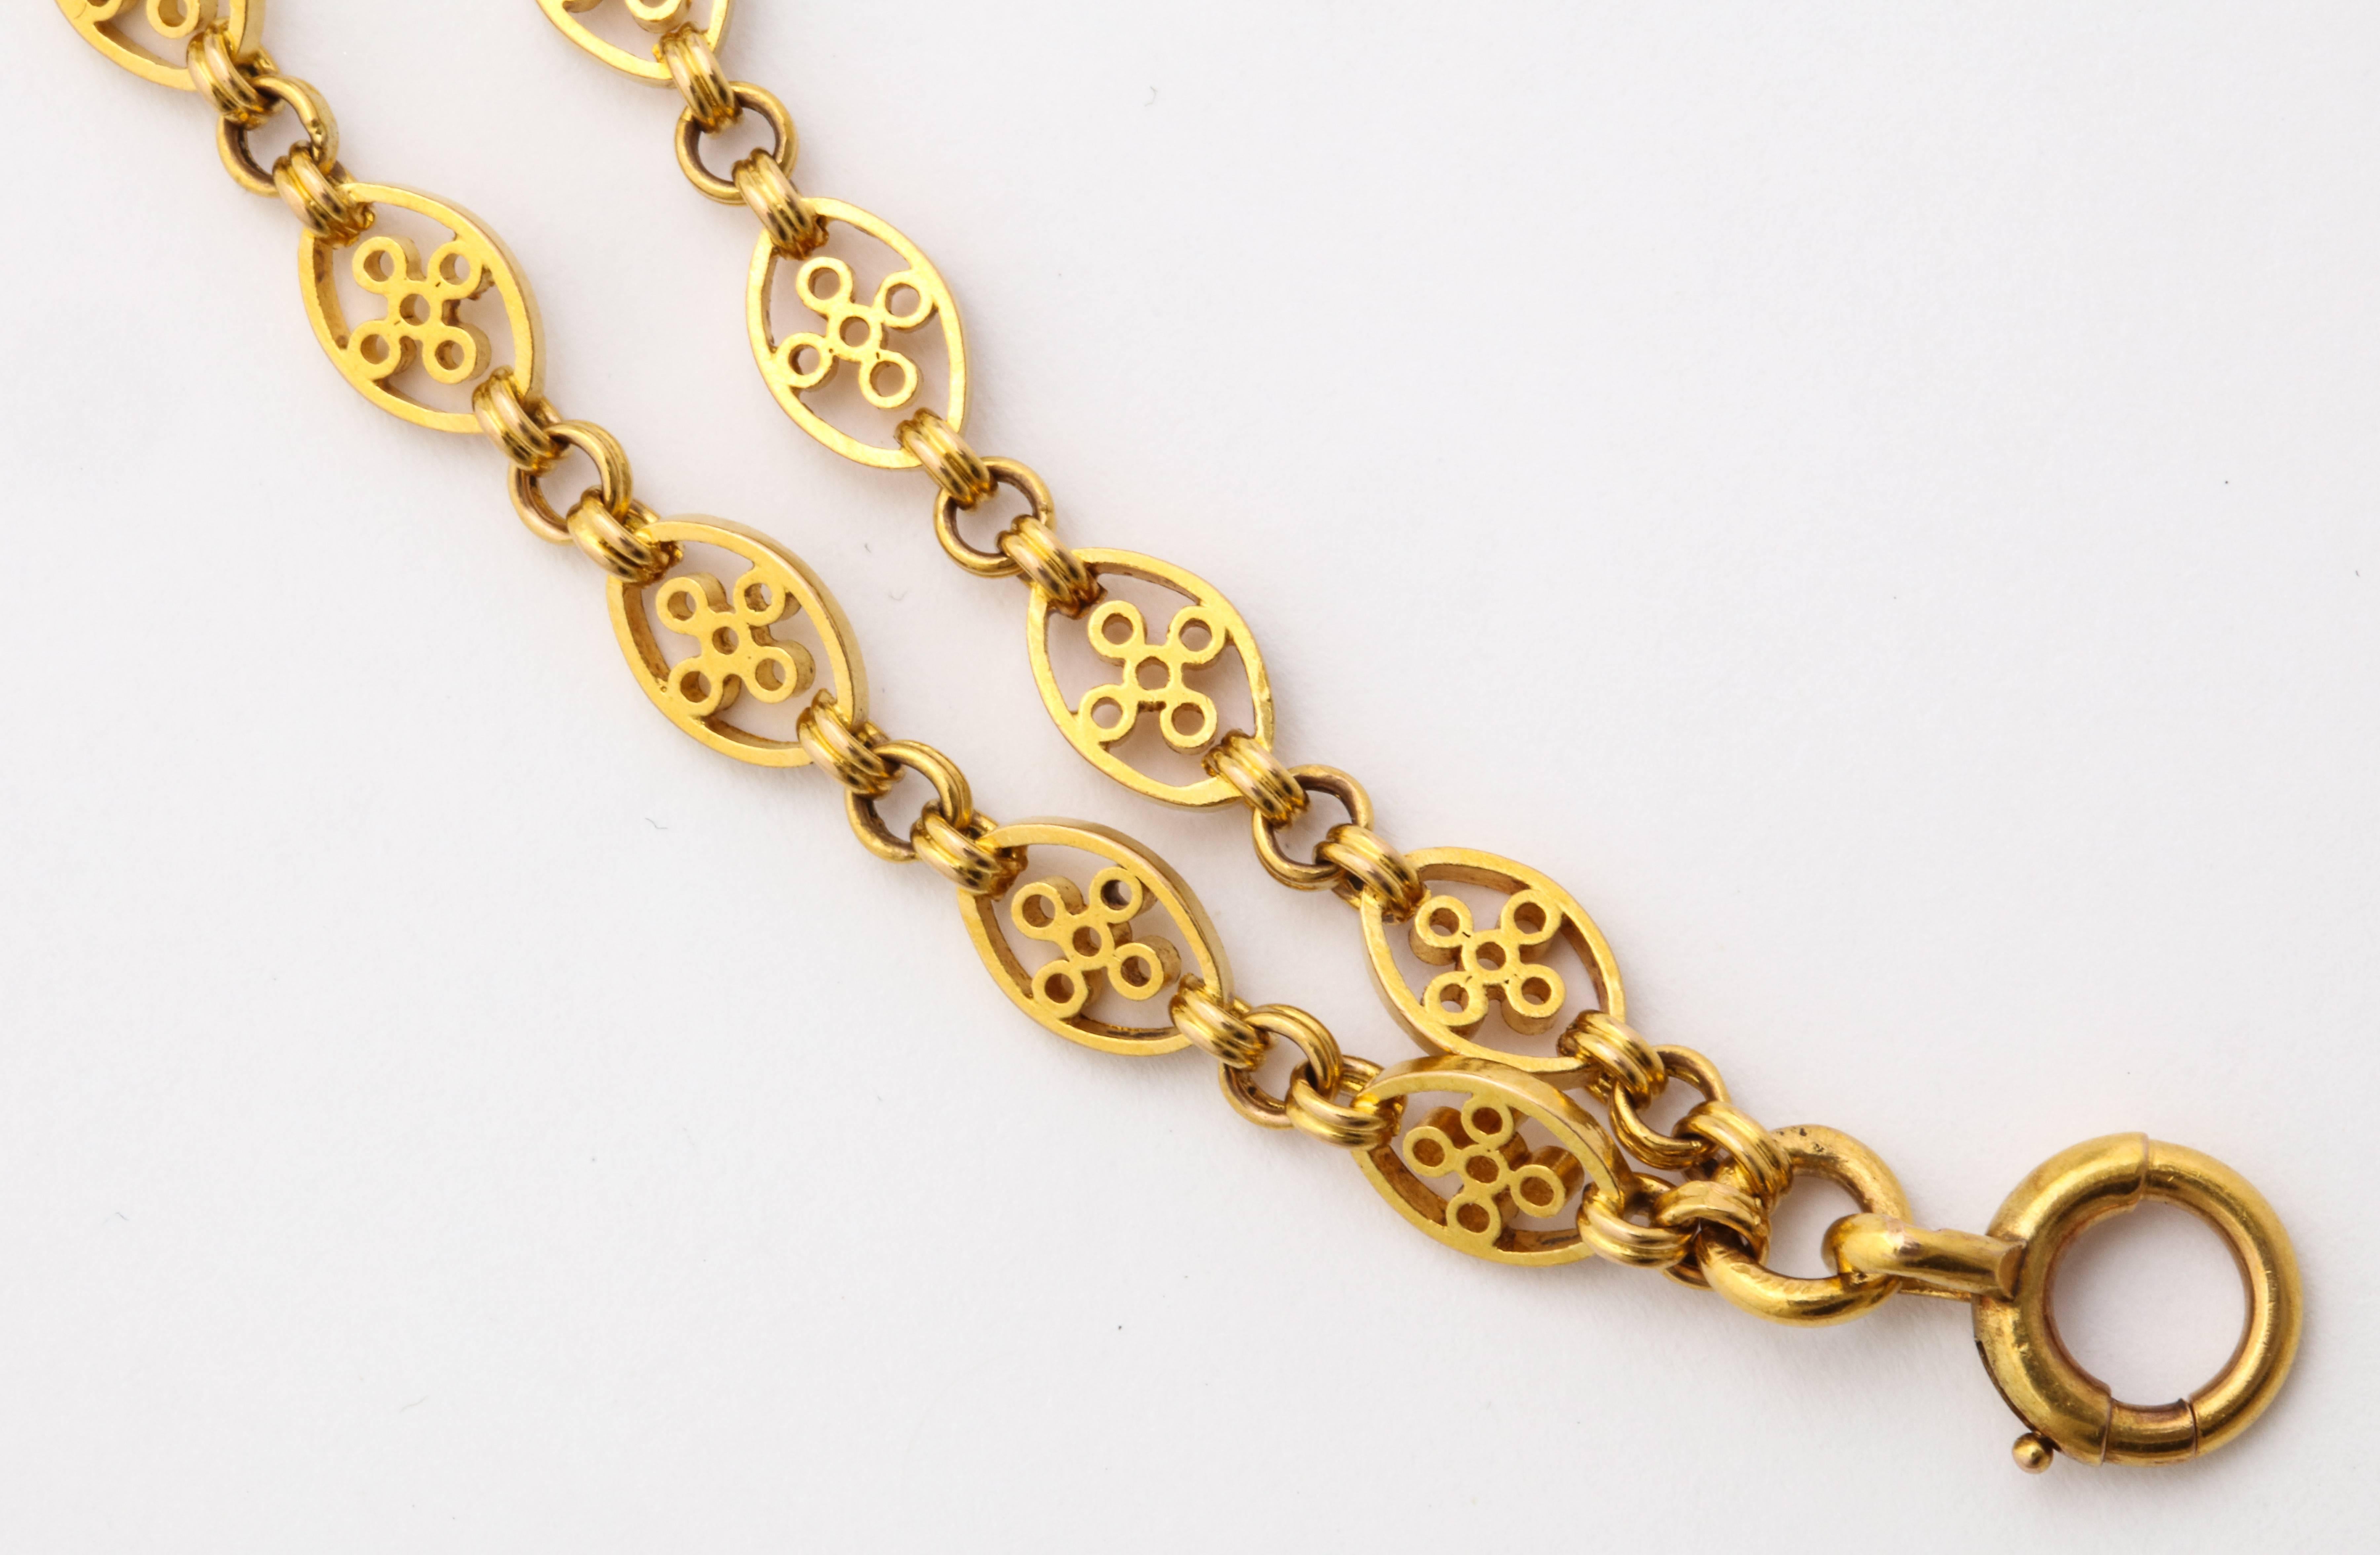 A very fine Art Deco French gold filigree Chain

18 karat gold

French marks

Made in France circa 1920

Very impressive 54 inch length